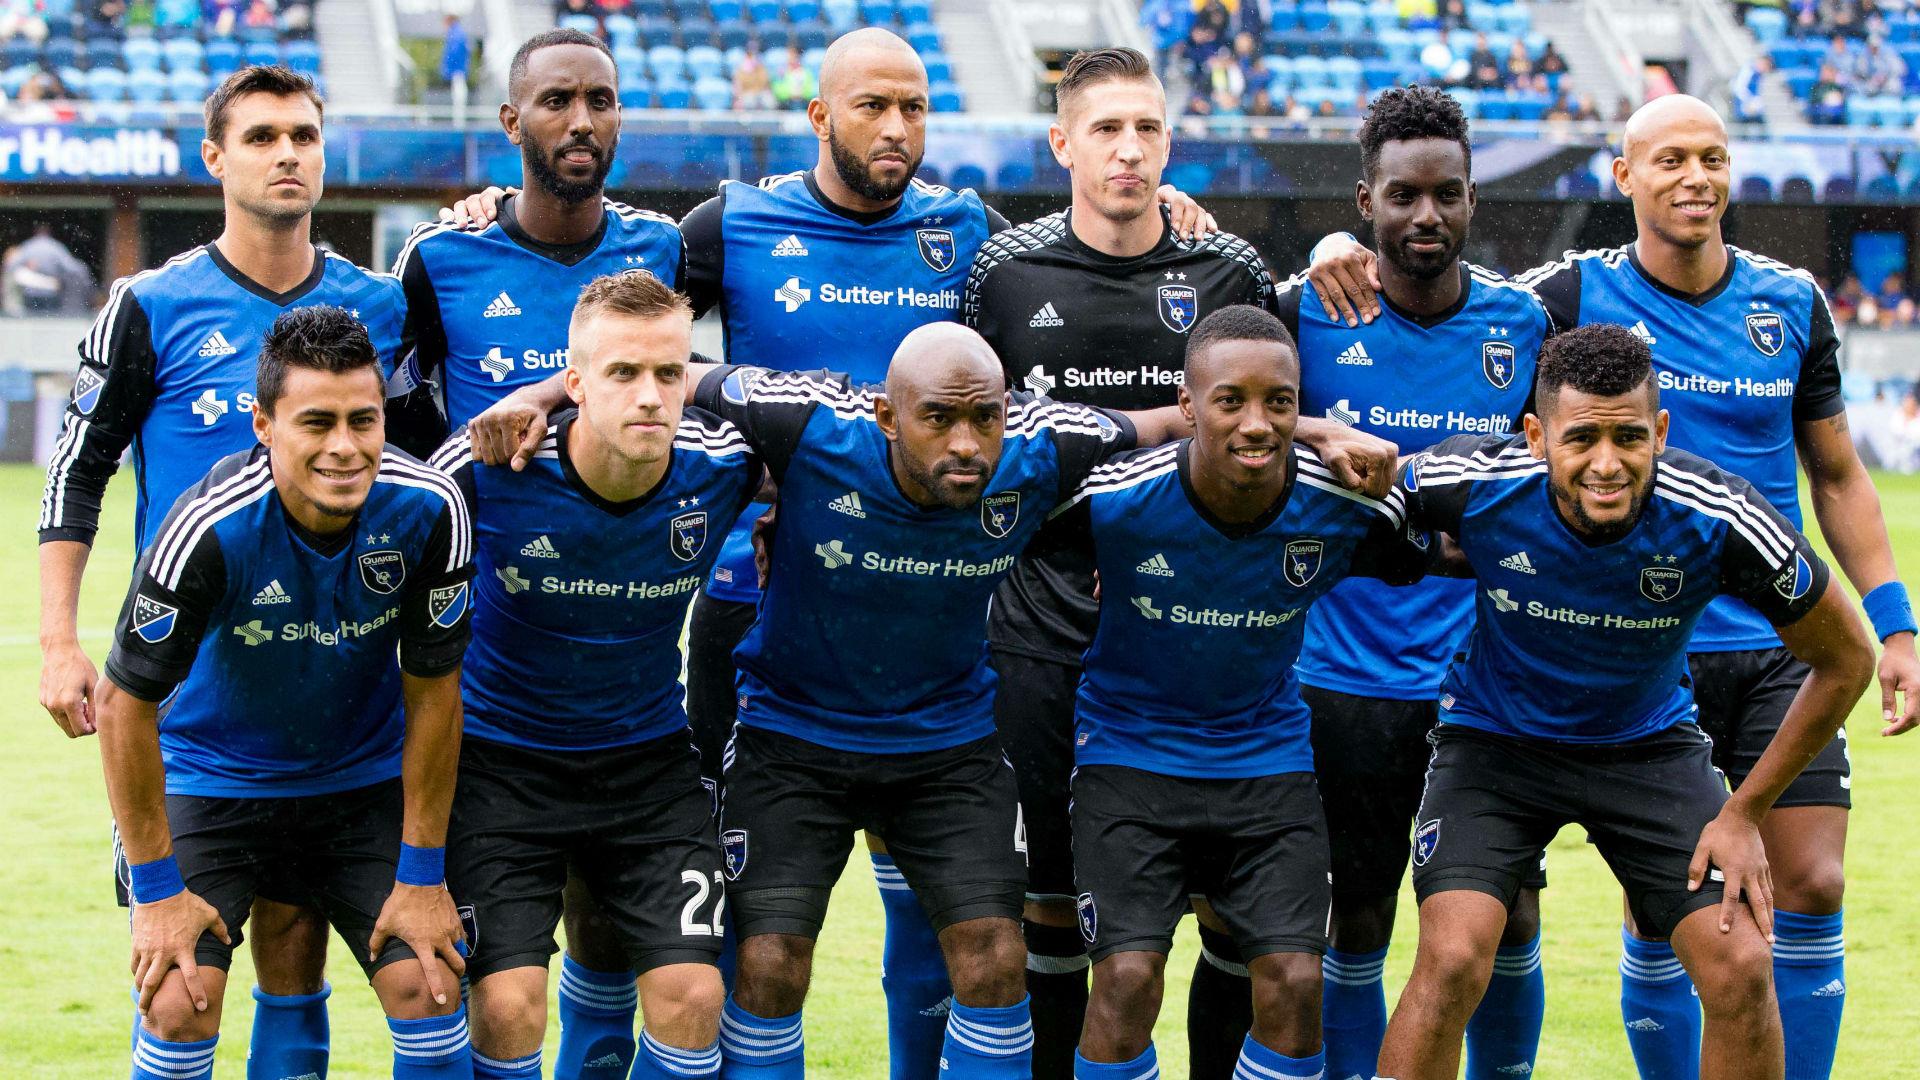 San Jose Earthquakes 2017 MLS season preview: Roster, schedule